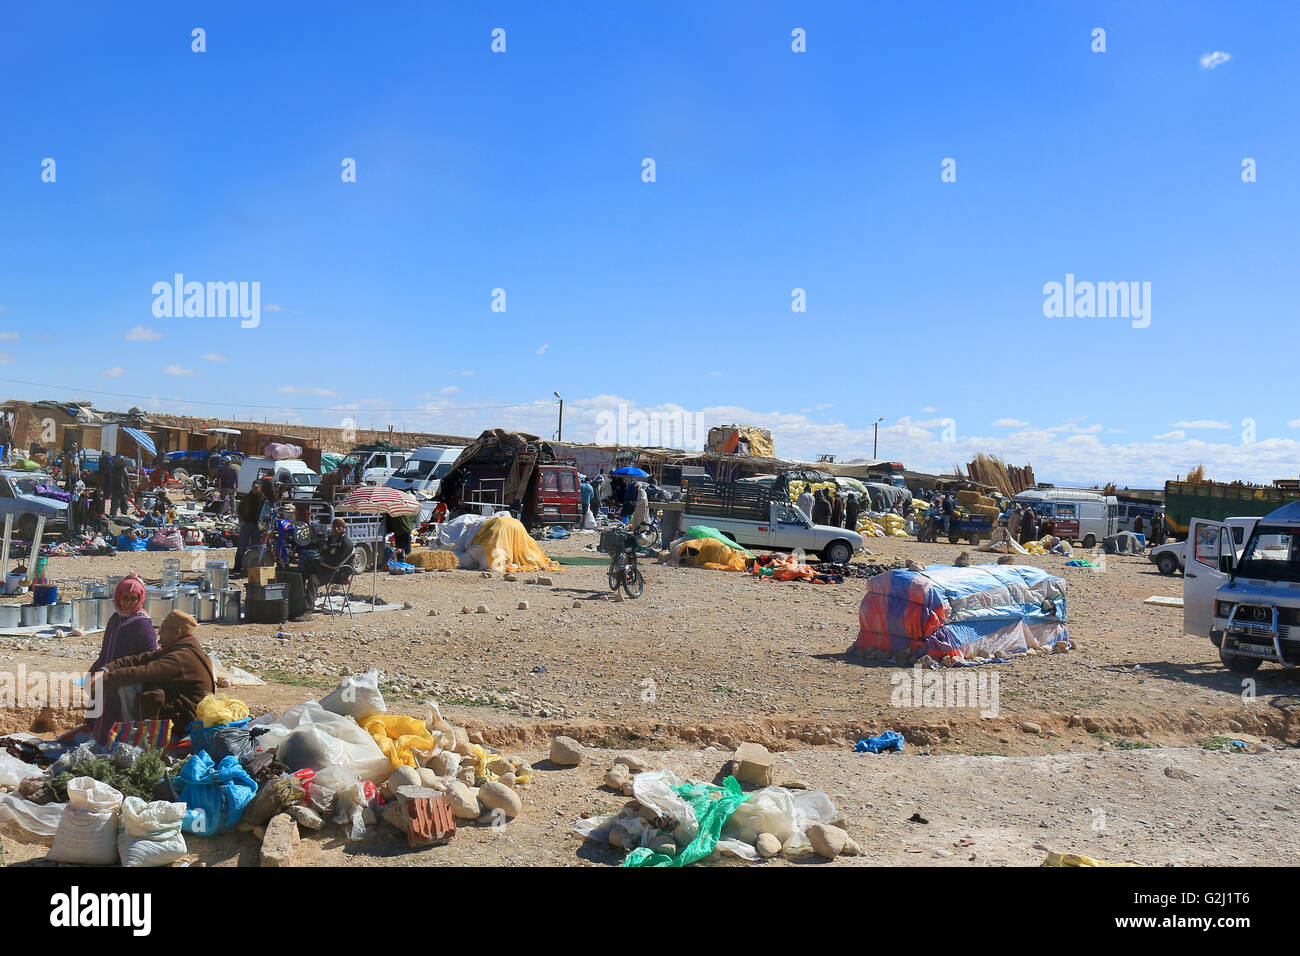 RISSANI, MOROCCO - MARCH 4, 2016: Outdoor local rural market in Southern Morocco selling their wares Stock Photo